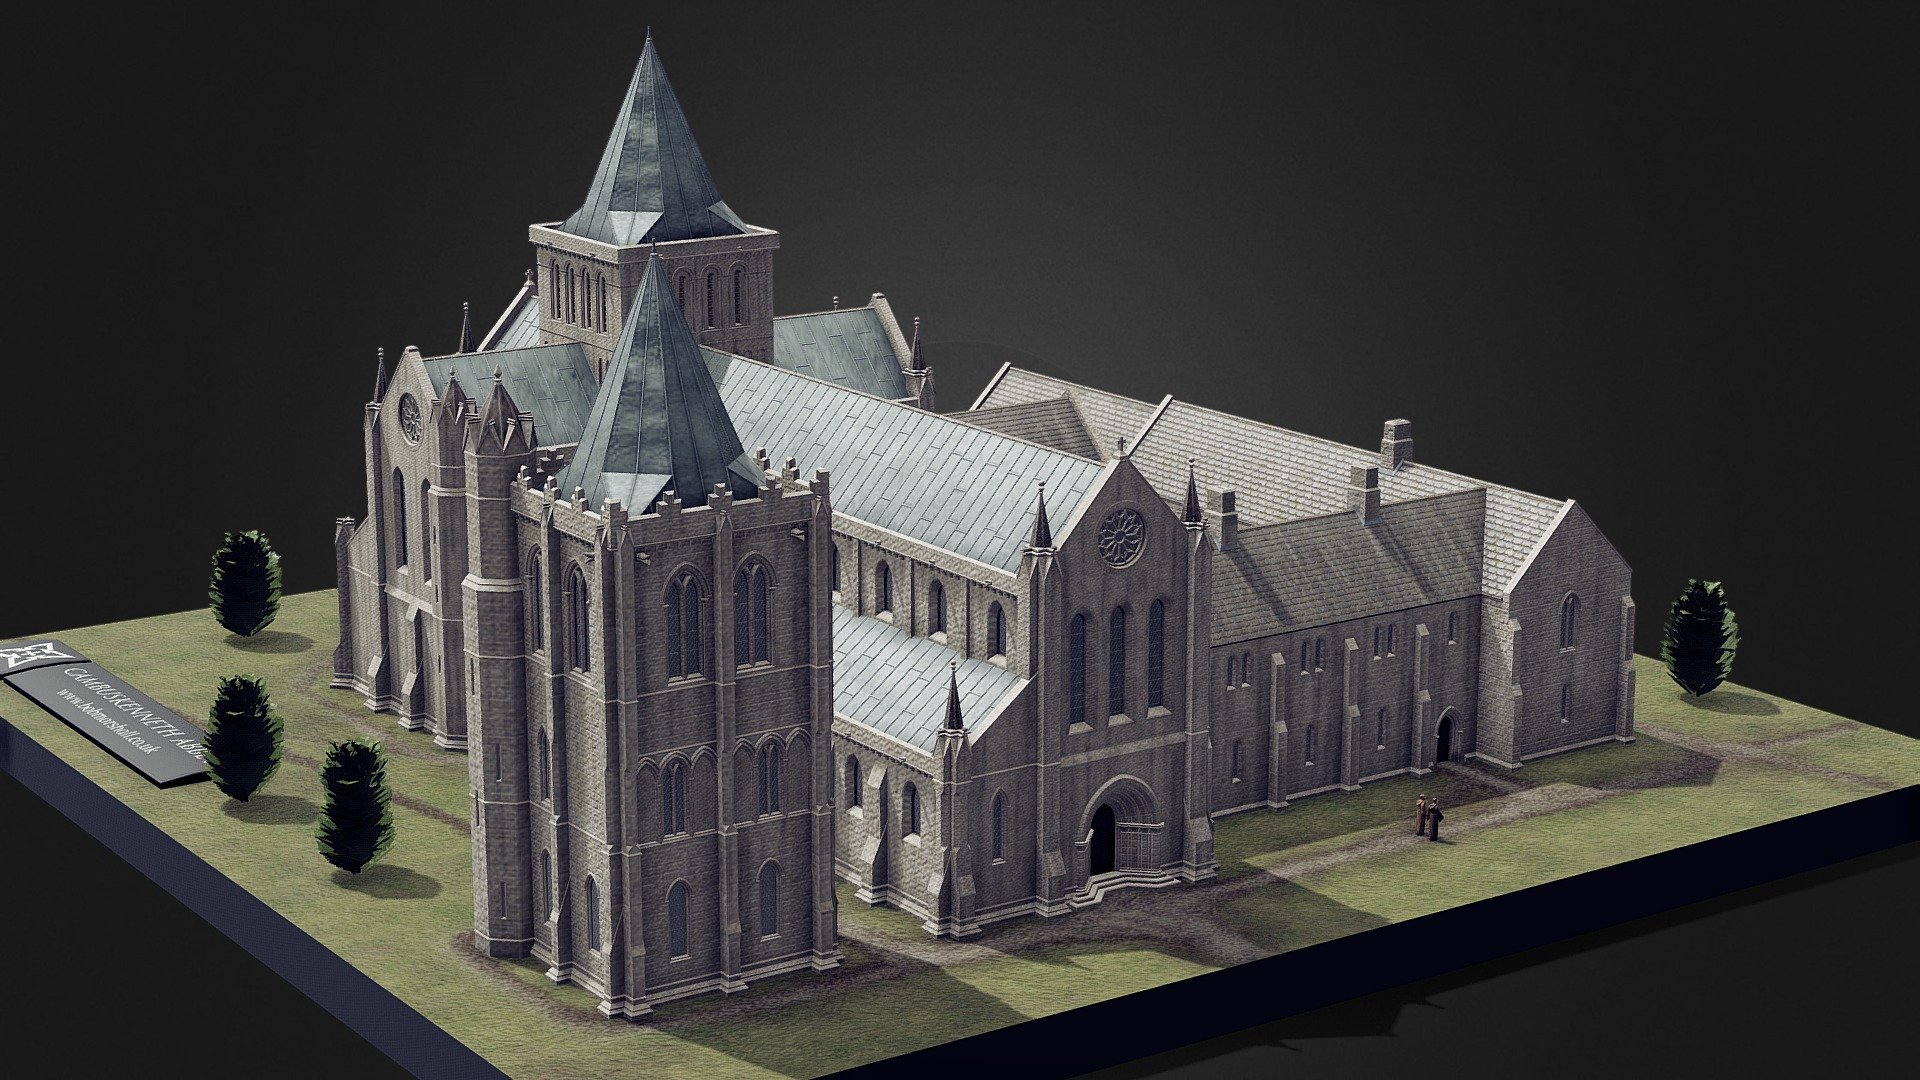 Digital 3D reconstruction model of Cambuskenneth Abbey, Stirling, Scotland showing what the abbey and adjoining monastic buildings might have looked like in its rebuilt state following an attack by the army of King Richard II of England in 1383. The abbey has an accompanying freestanding bell tower or campanile which is unusual in Scotland. The tower is the only surviving part of the original church that remains standing to this day. It may have been spared its destruction by virtue of its use as a watchtower. The exterior masonry of the church may have appeared with a much brighter, lime-washed rendering than I have shown in this reconstruction. The masonry may also have featured decorative (painted) elements but such evidence for the exterior rendering of churches from before the reformation is hard to come by. The forms of the monastic buildings including the monks' dormitory, refectory, cloister and chapterhouse are entirely speculative 3d model